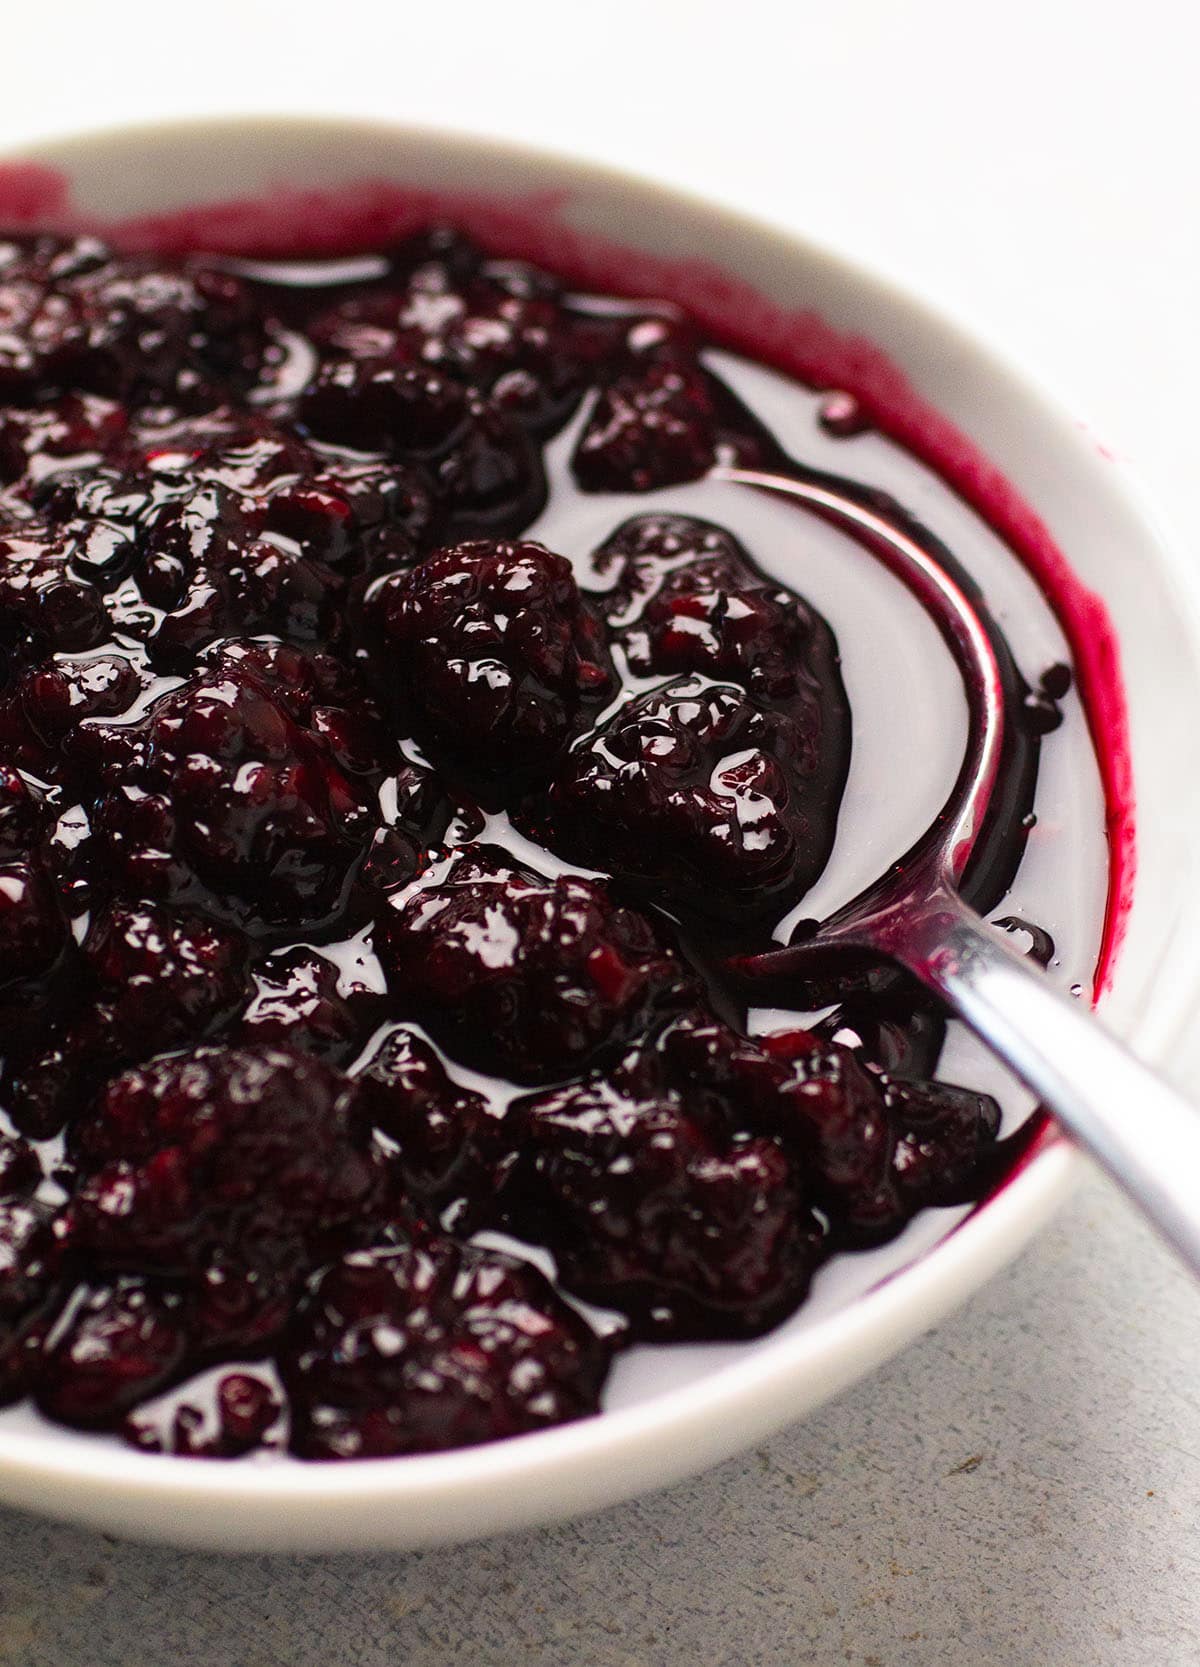 Spoon stirring blackberry sauce in a white bowl.